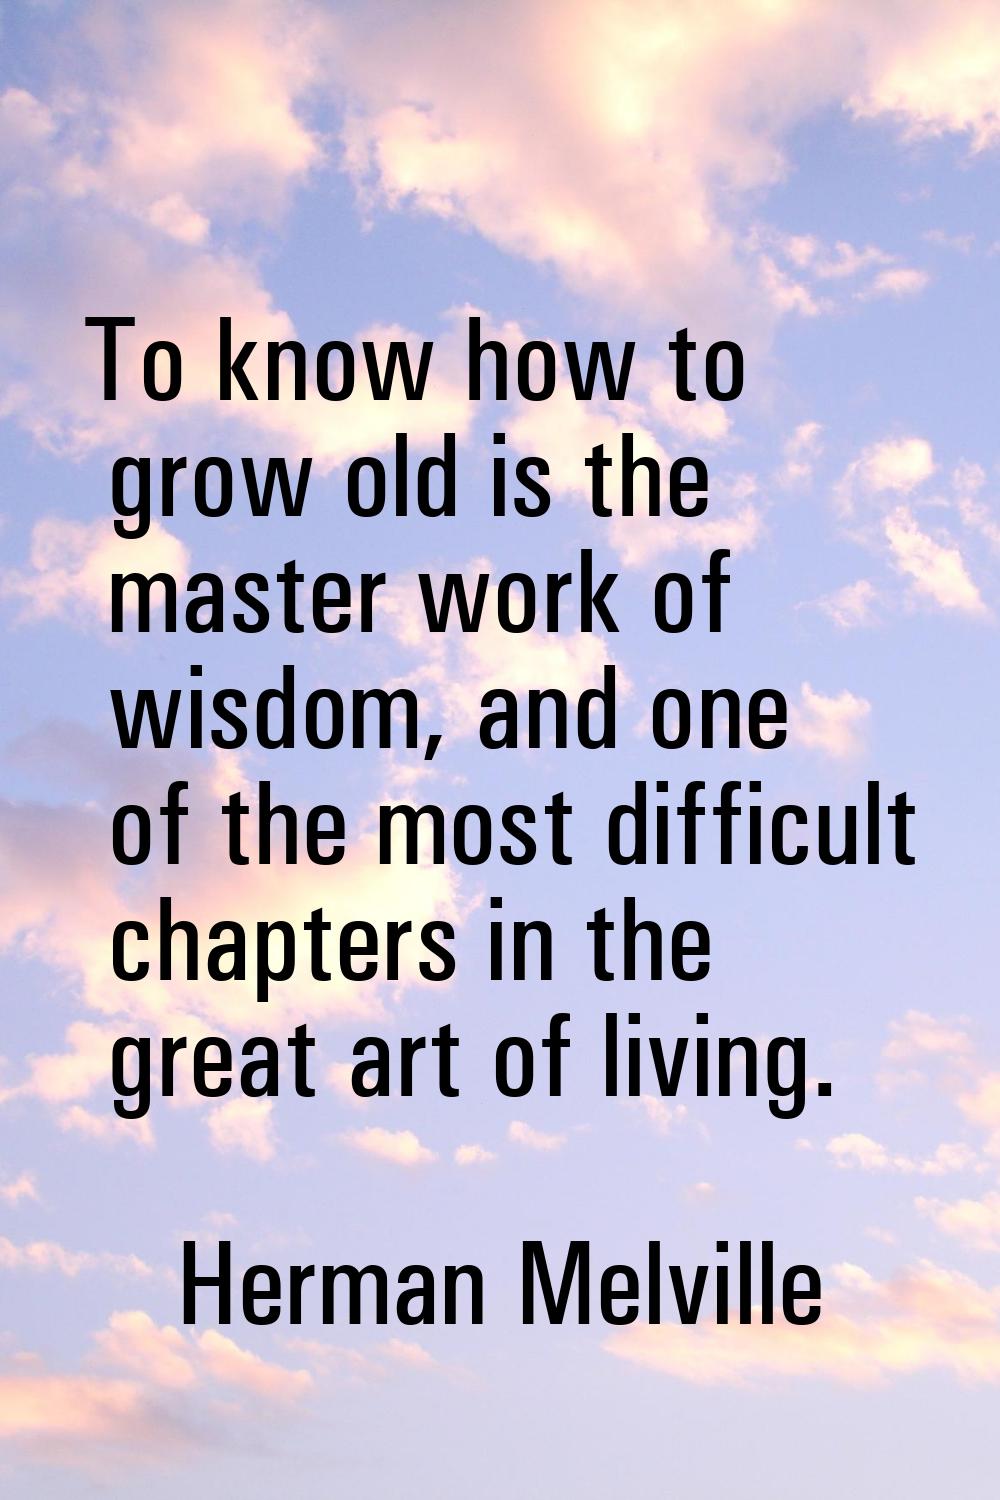 To know how to grow old is the master work of wisdom, and one of the most difficult chapters in the